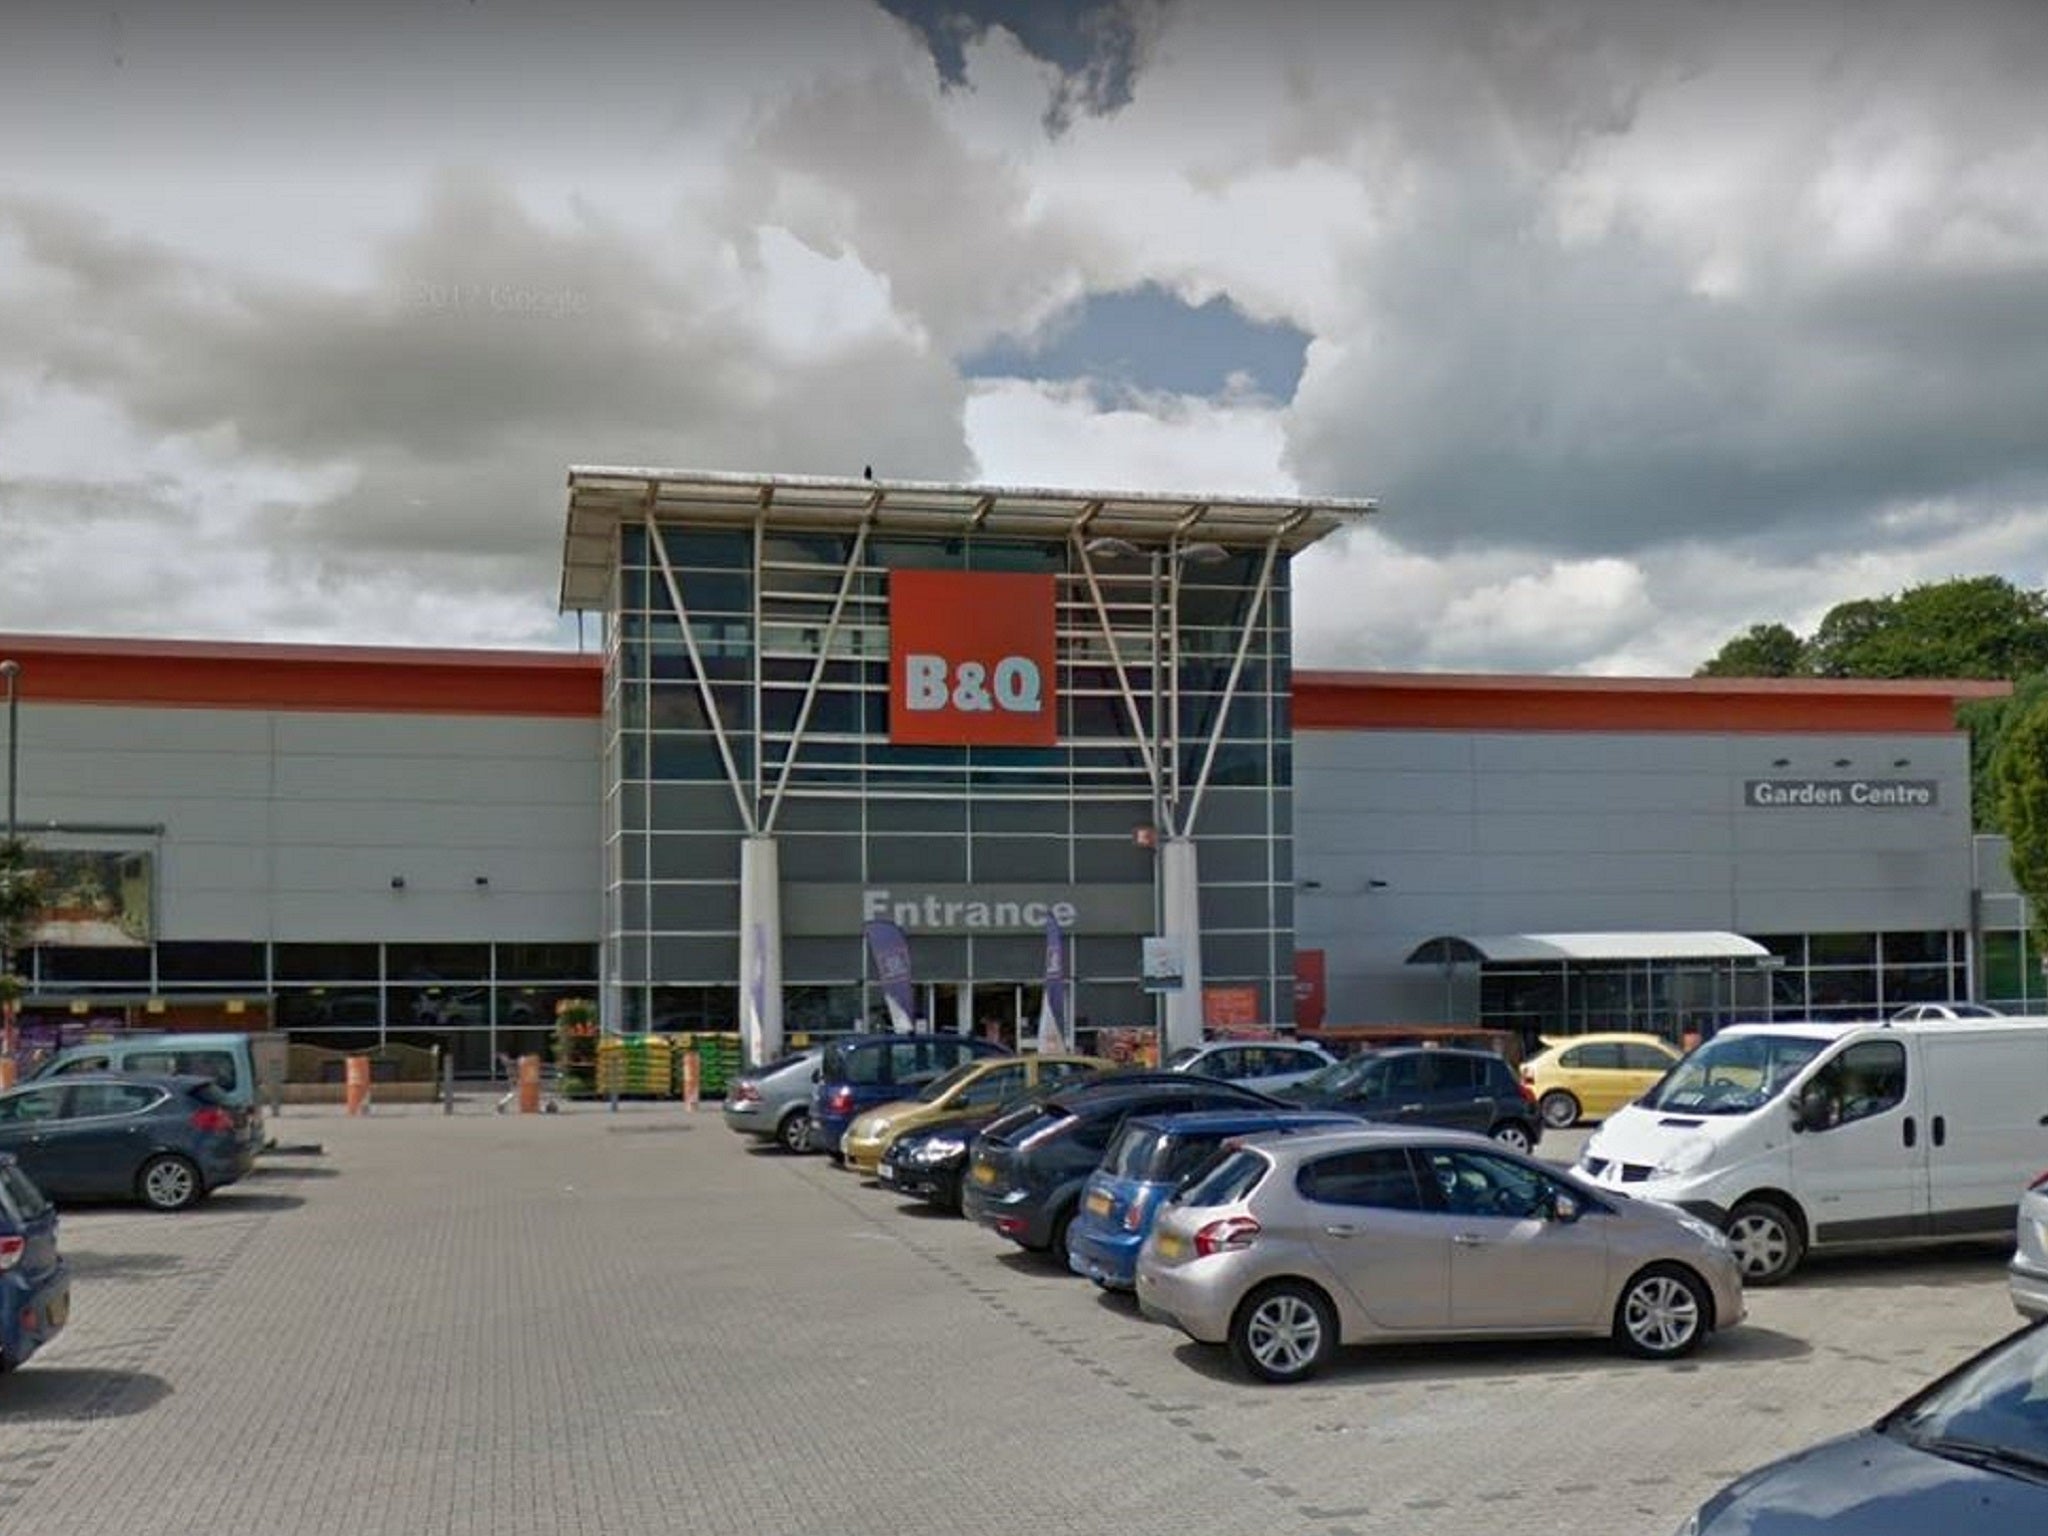 A couple has been fined after they travelled to B&Q with their five children and two neighbours to buy “essential” wood during England’s coronavirus lockdown